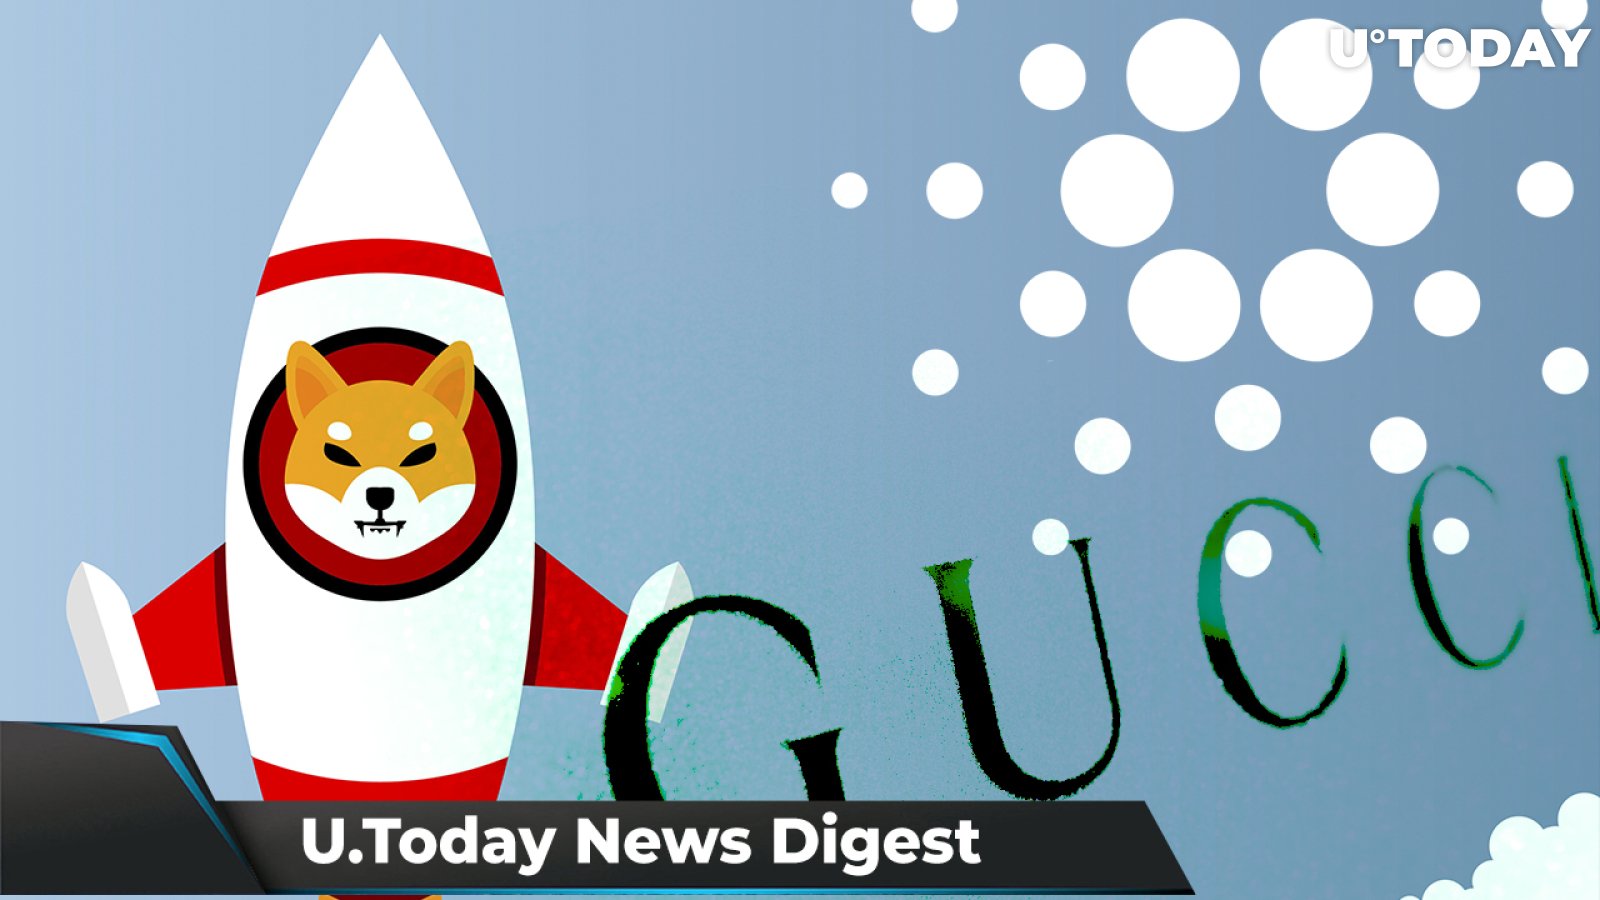 Large SHIB Transactions Reach $390 Million, Cardano Available on Bitpoint Pro, Gucci Buys Land in Sandbox: Crypto News Digest by U.Today